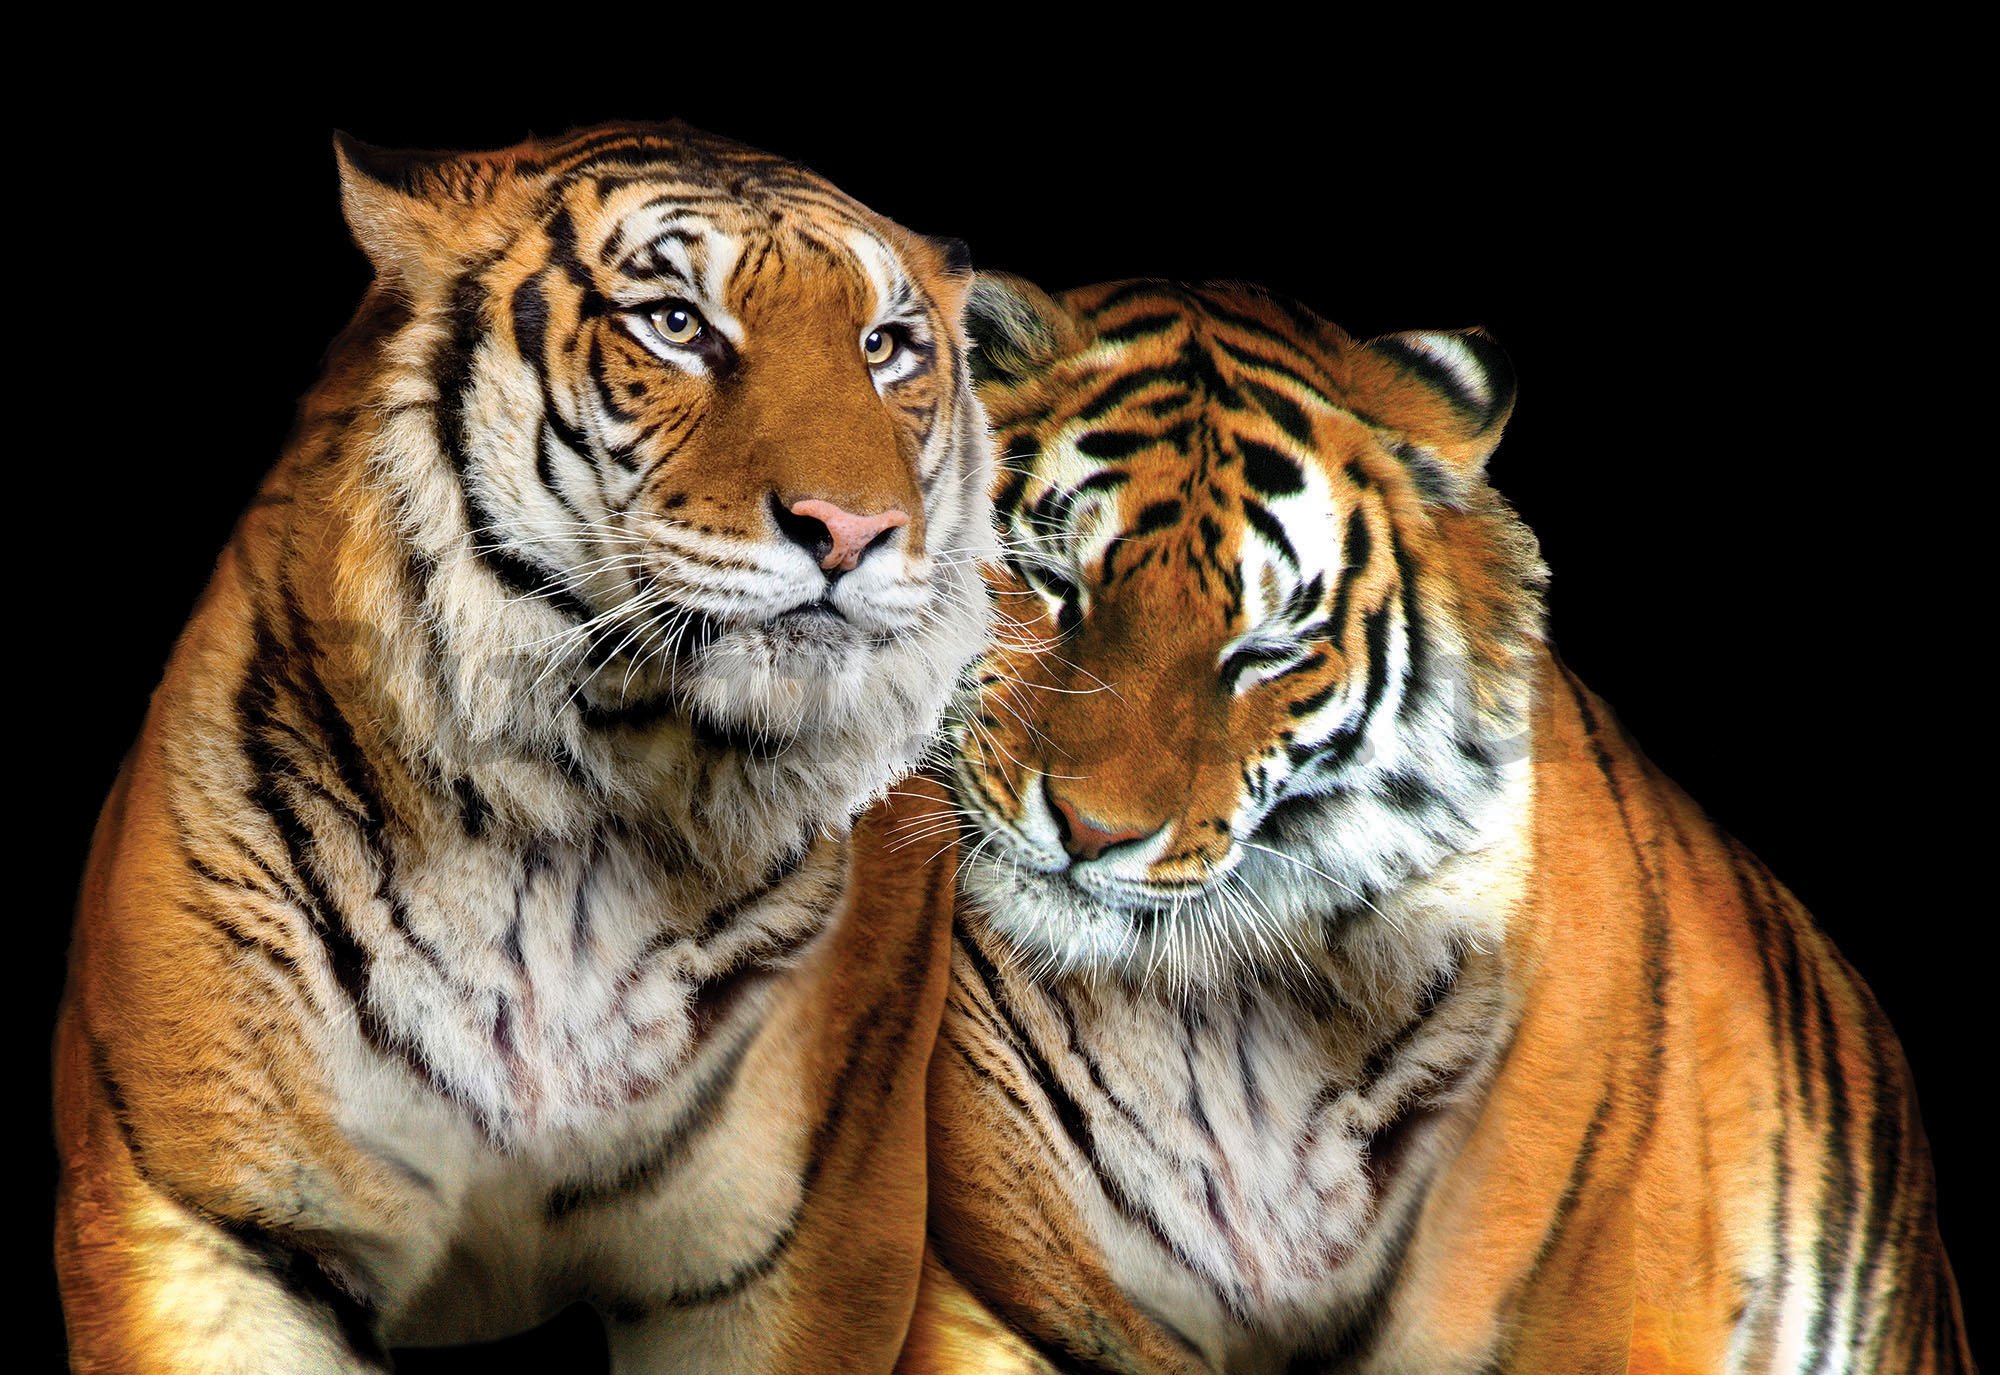 Wall Mural: Two Tigers - 254x368 cm